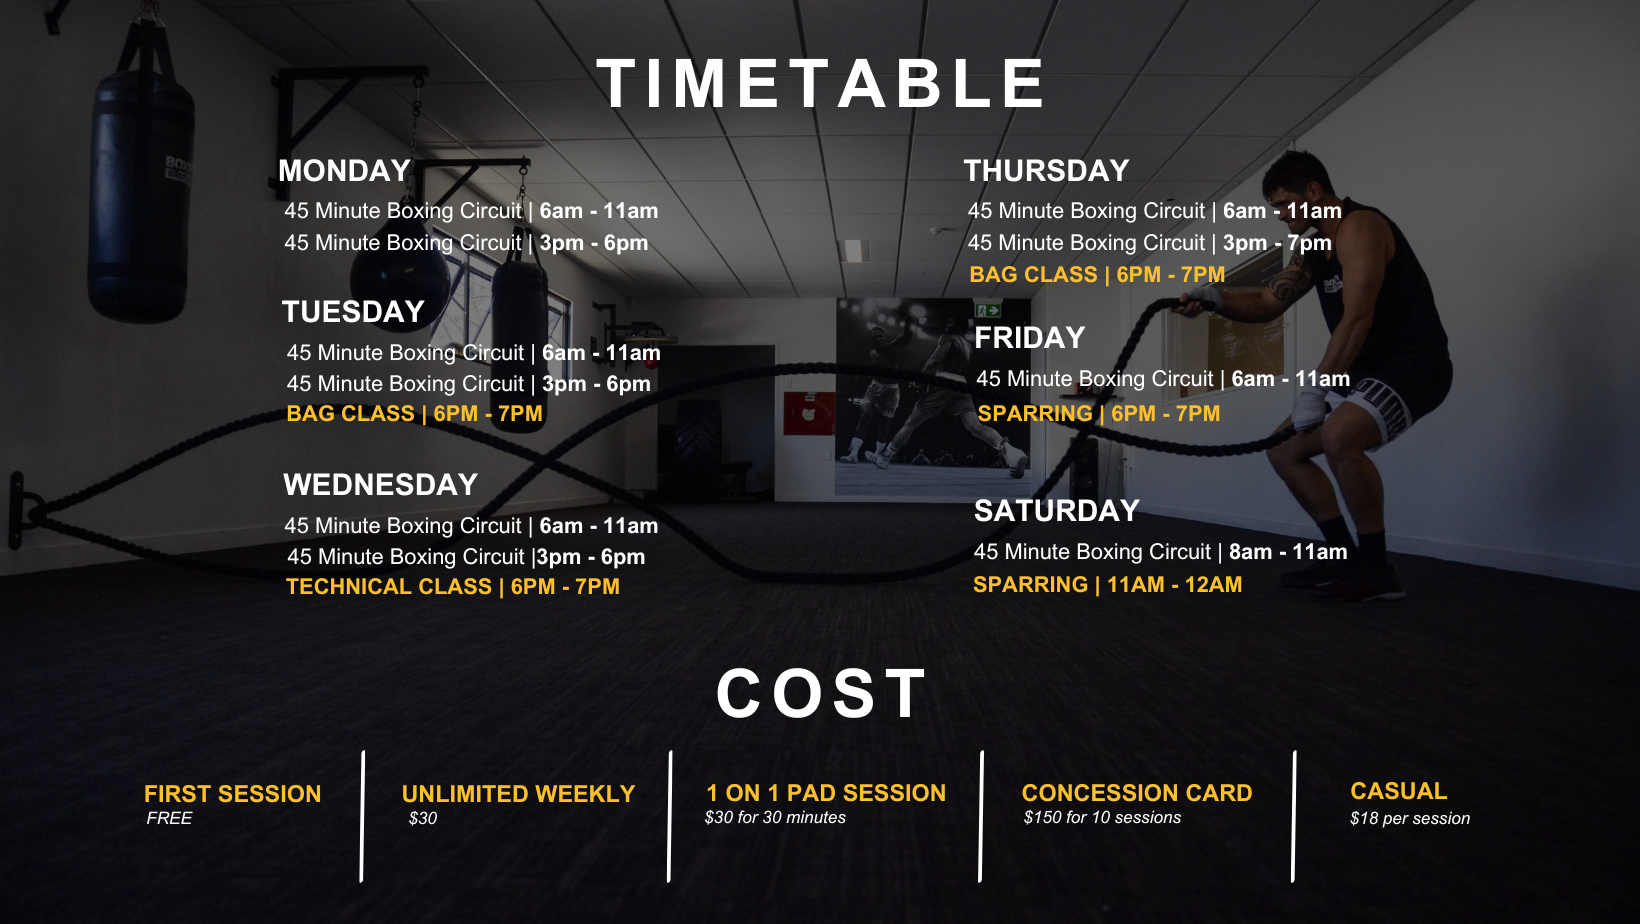 Boxfit Brothers Timetable and cost